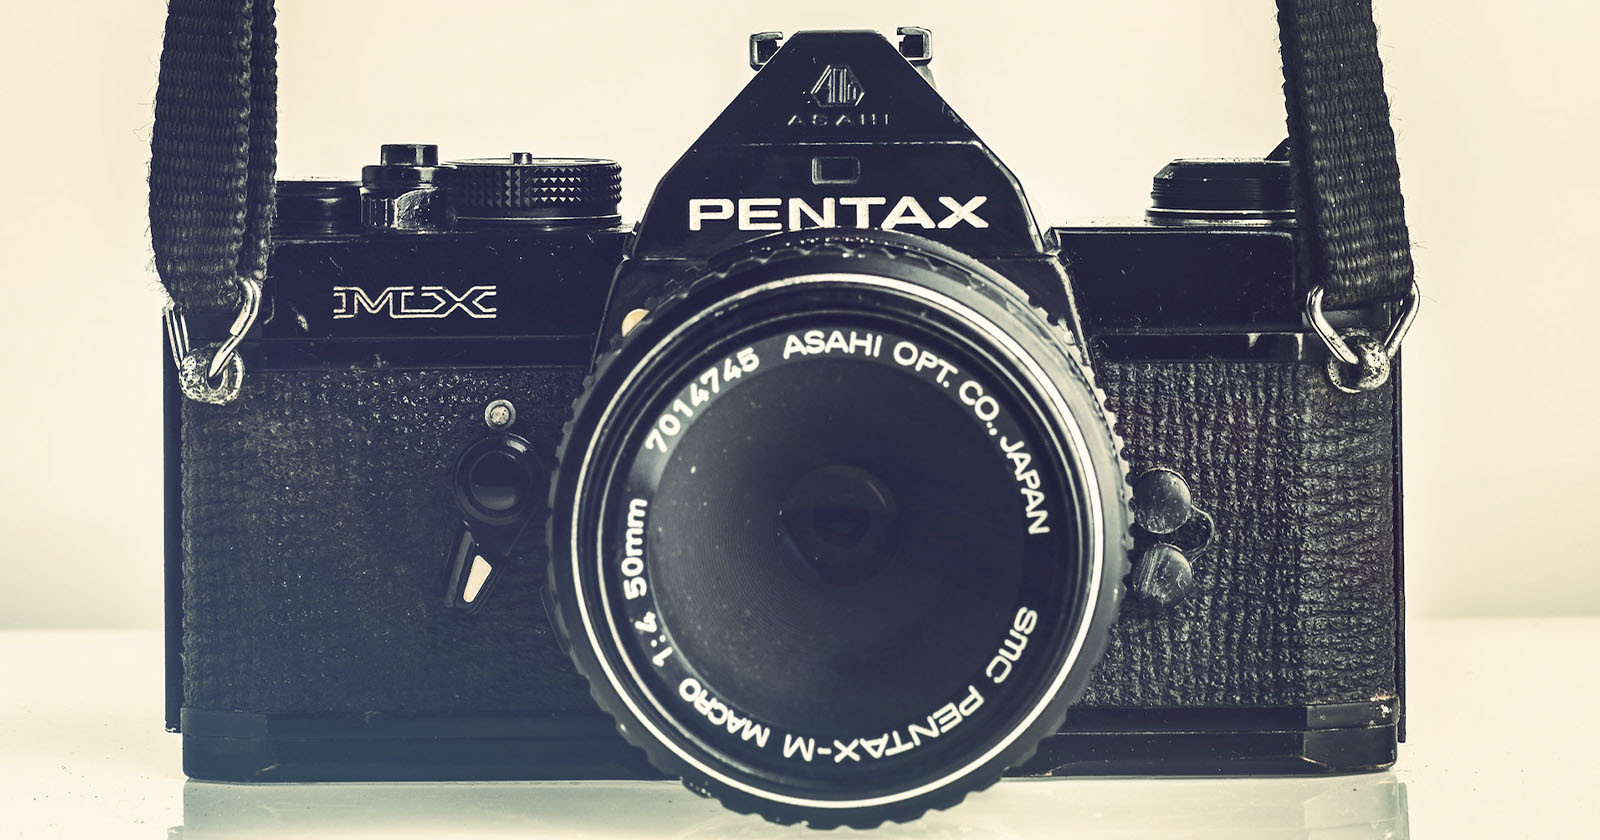  pentax launches 35mm camera project after film 